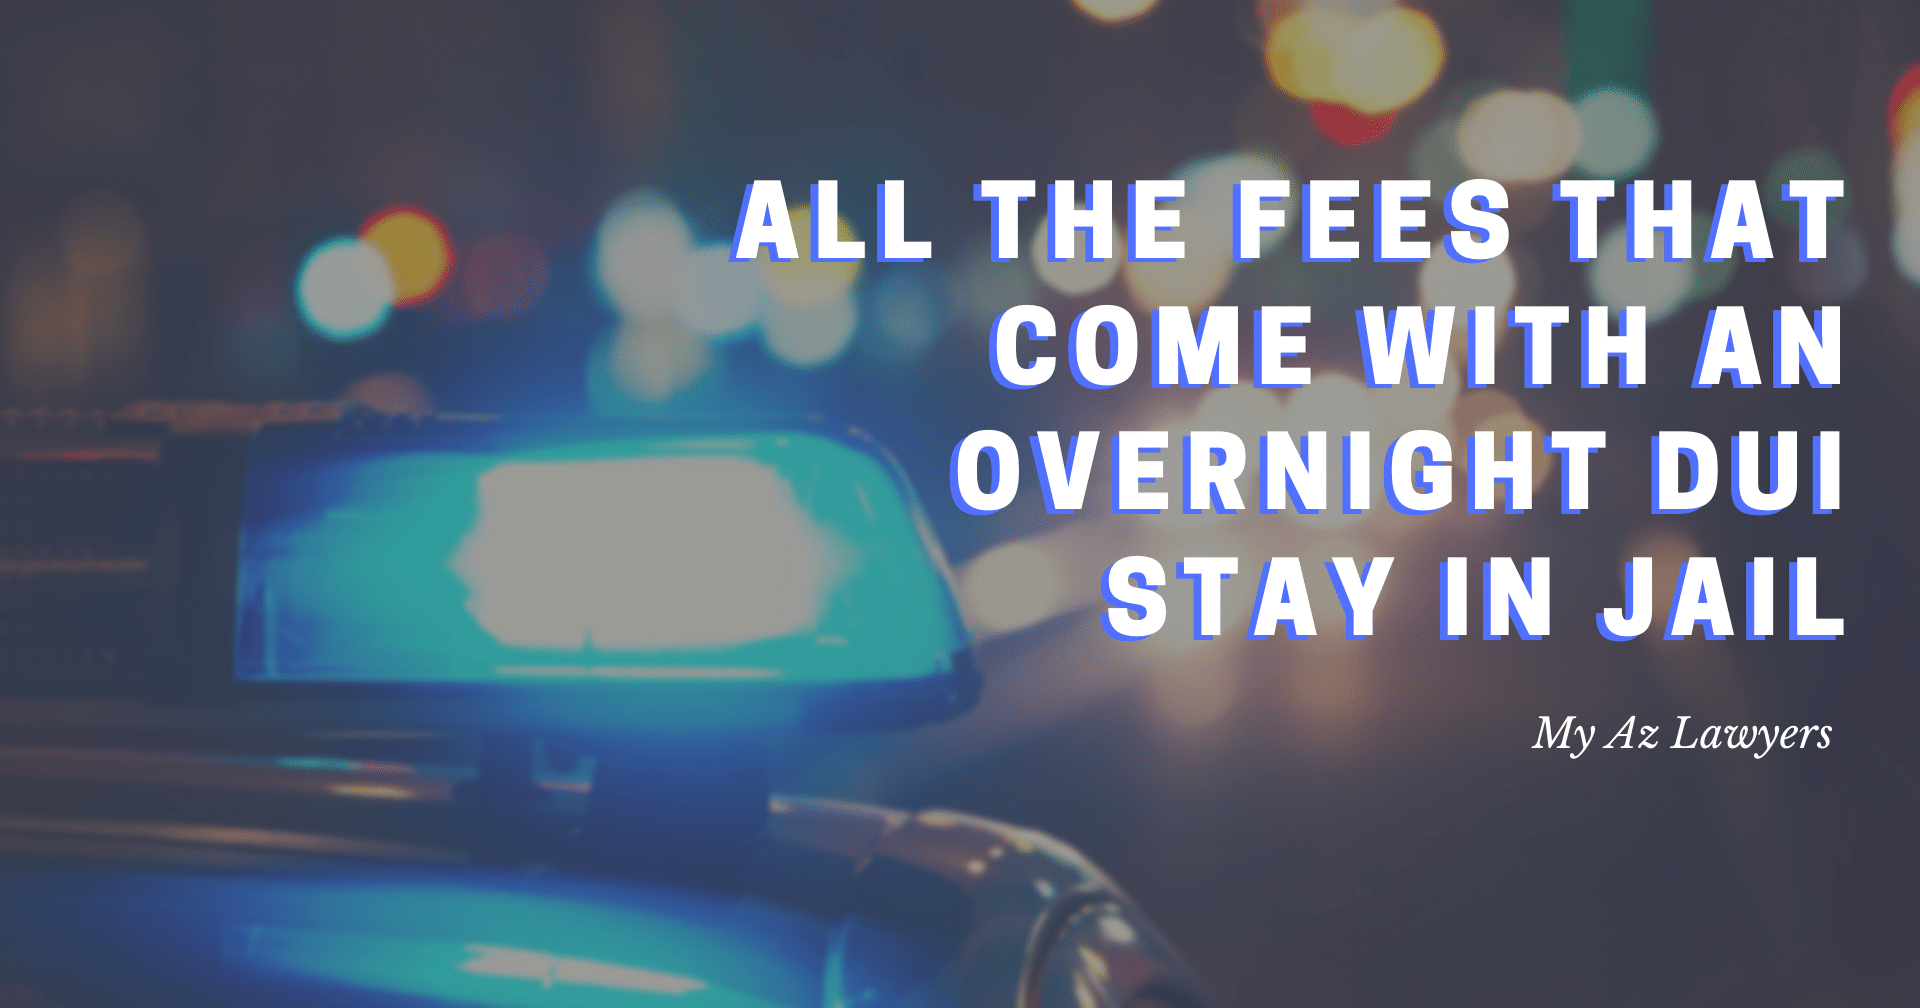 All the Fees that Come with an Overnight DUI Stay in Jail - My AZ Lawyers